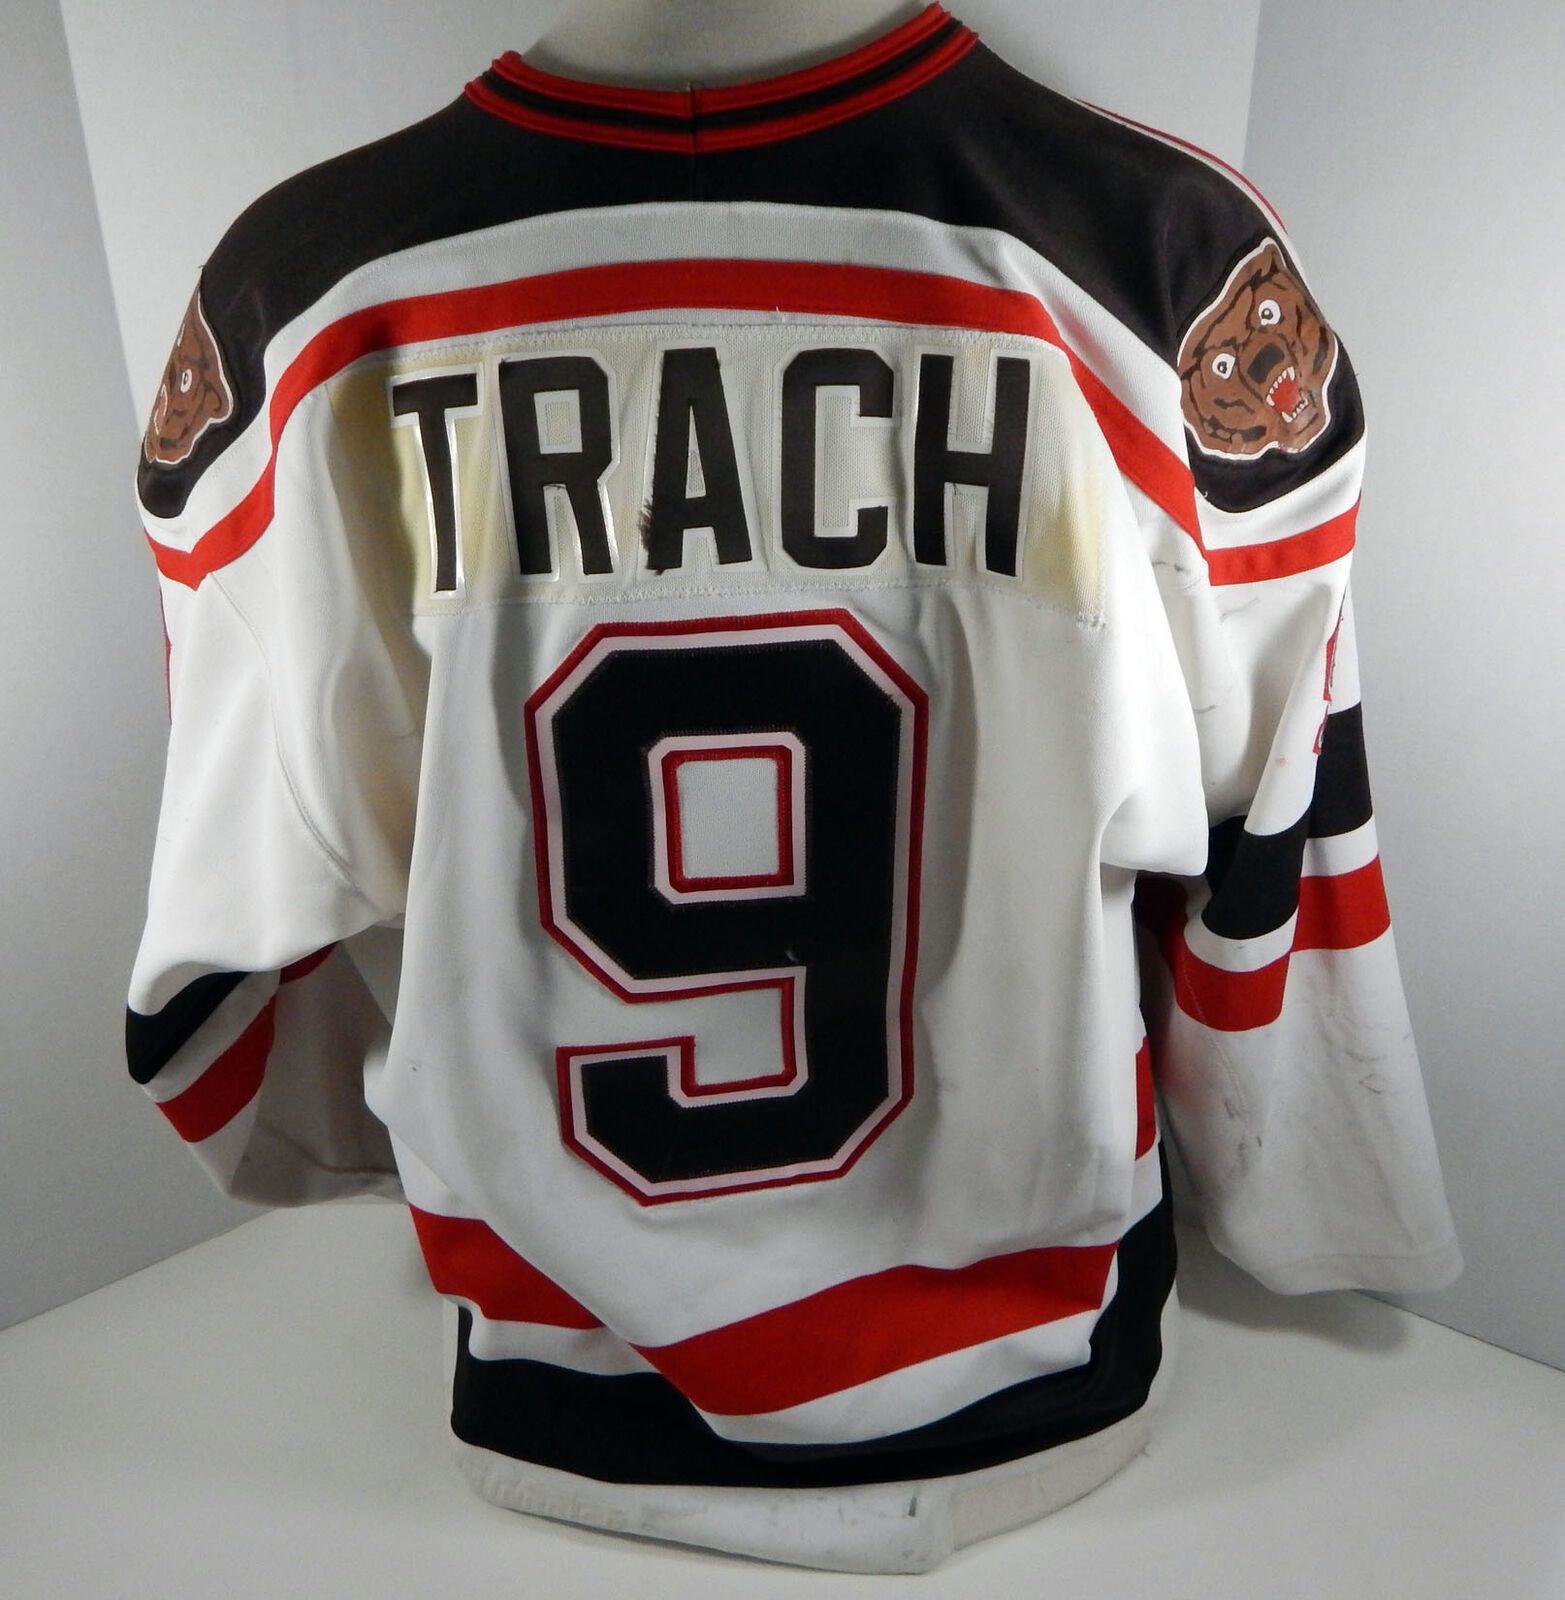 1992-95 Brown Bears Eric Trach SEAL limited product #9 White Game DP01752 Used Jersey trust